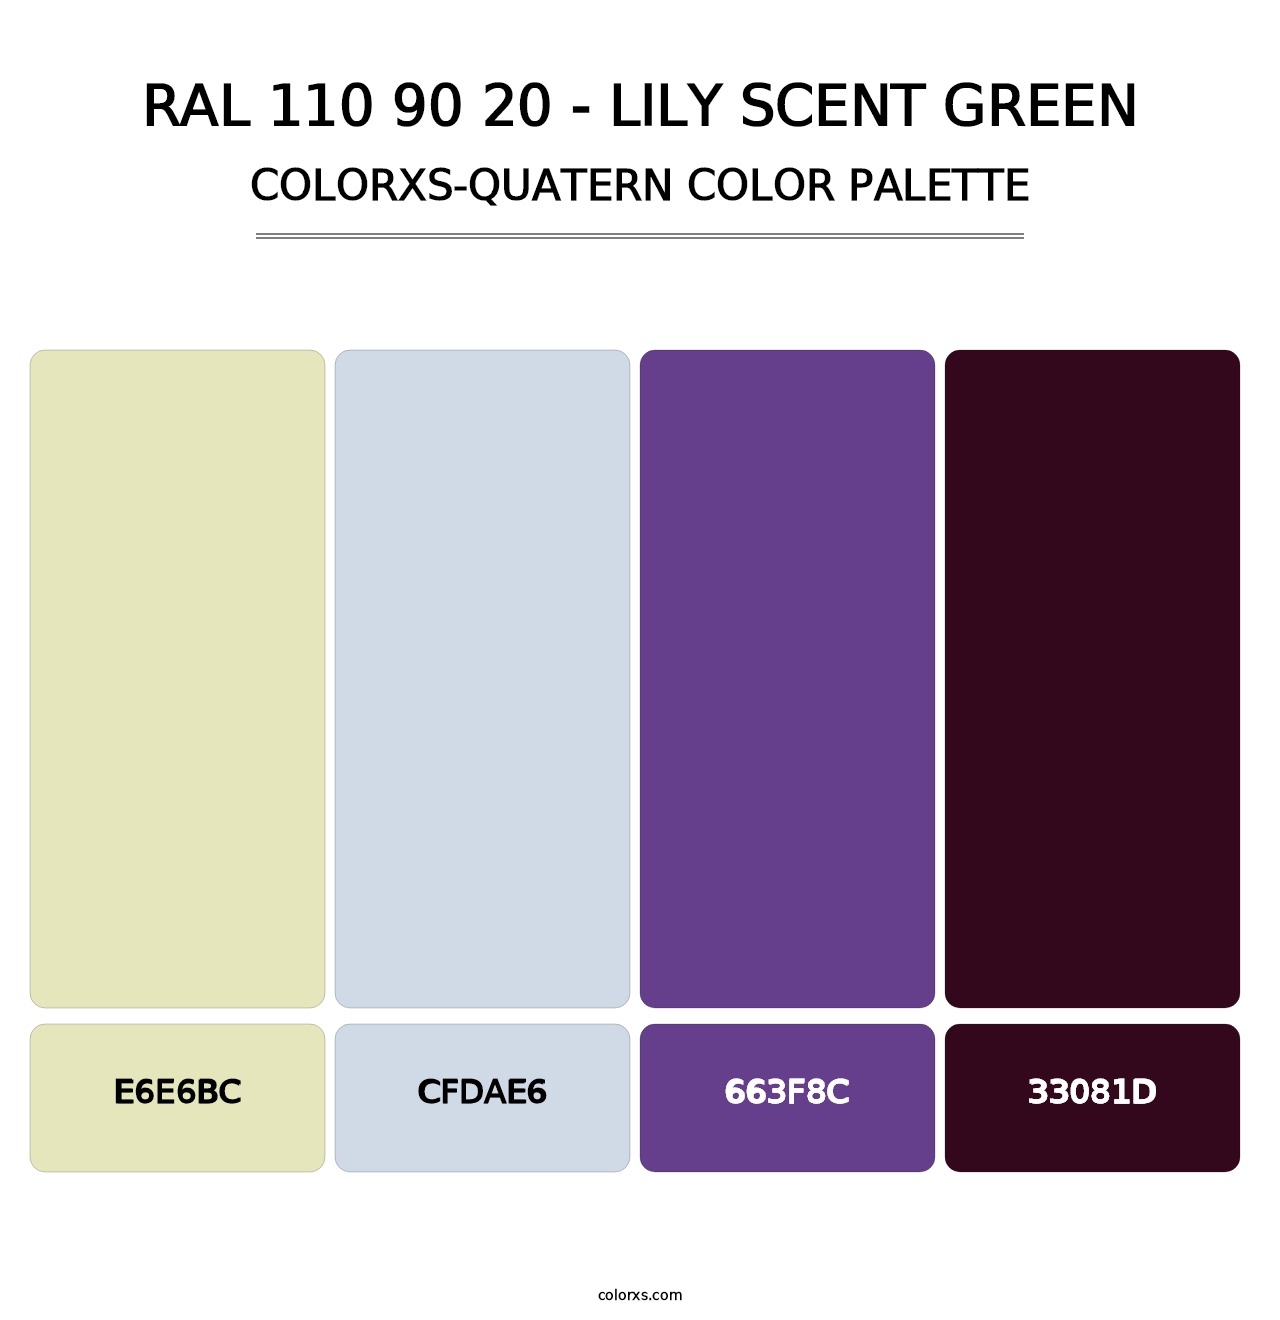 RAL 110 90 20 - Lily Scent Green - Colorxs Quatern Palette